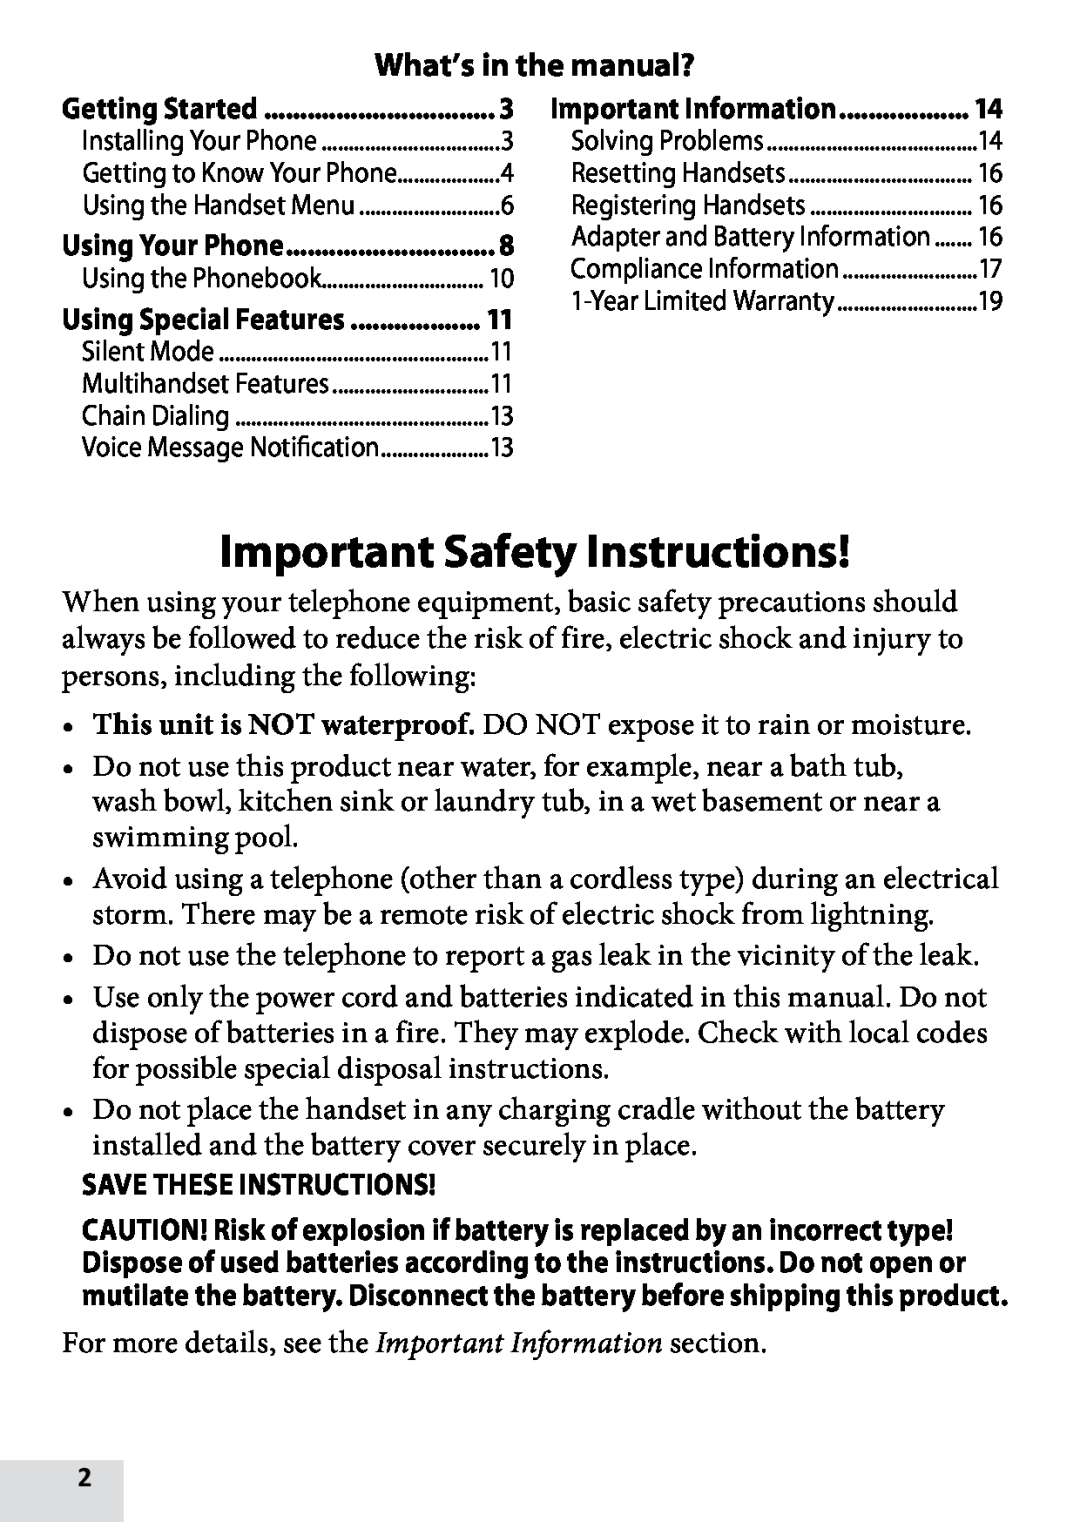 Uniden DRX100, D1760-12, D1760-2, D1760-11 Important Safety Instructions, What’s in the manual?, Save These Instructions 